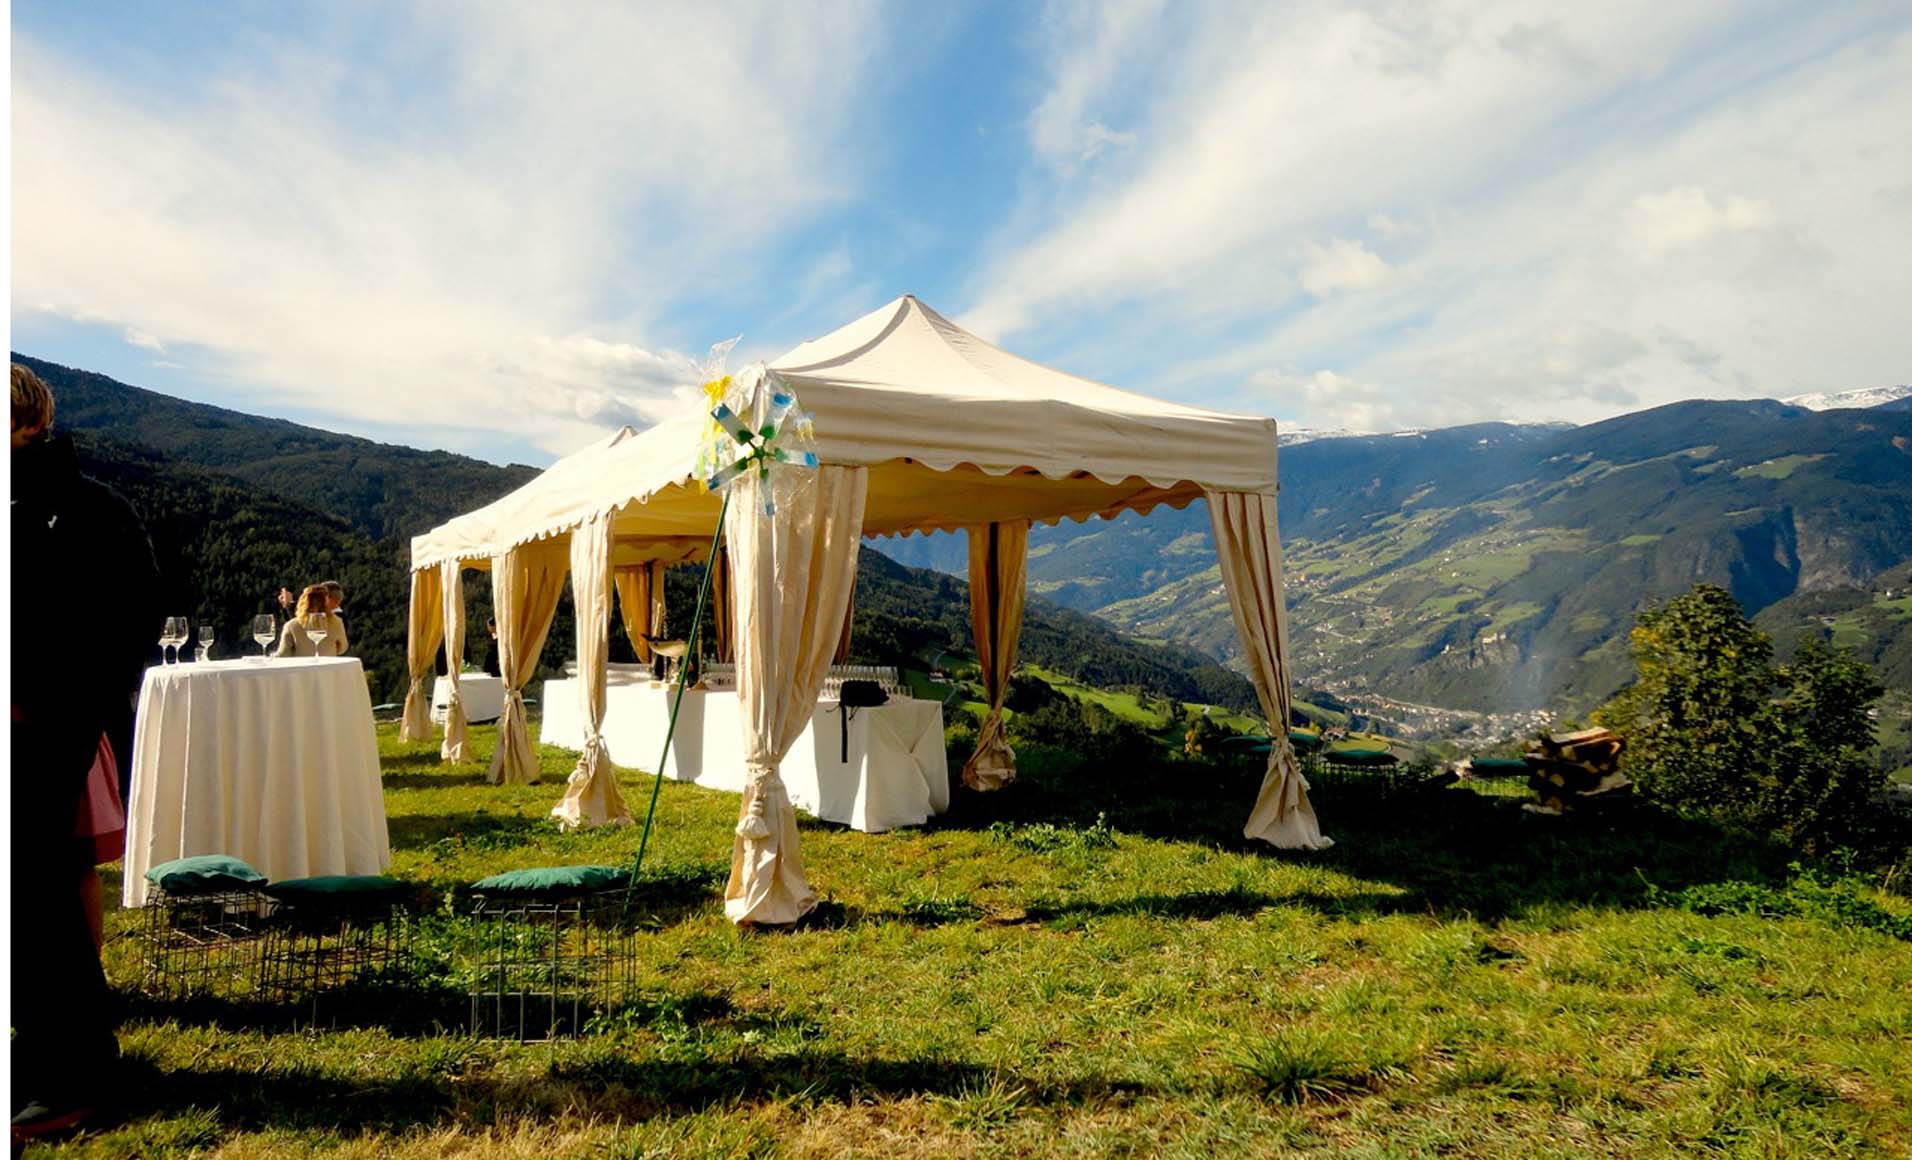 Marriage in South Tyrol Find the perfect catering, wedding Banquet and more for your wedding, event and other occasion. Website: https://www.hannahelia.com by hannahelia